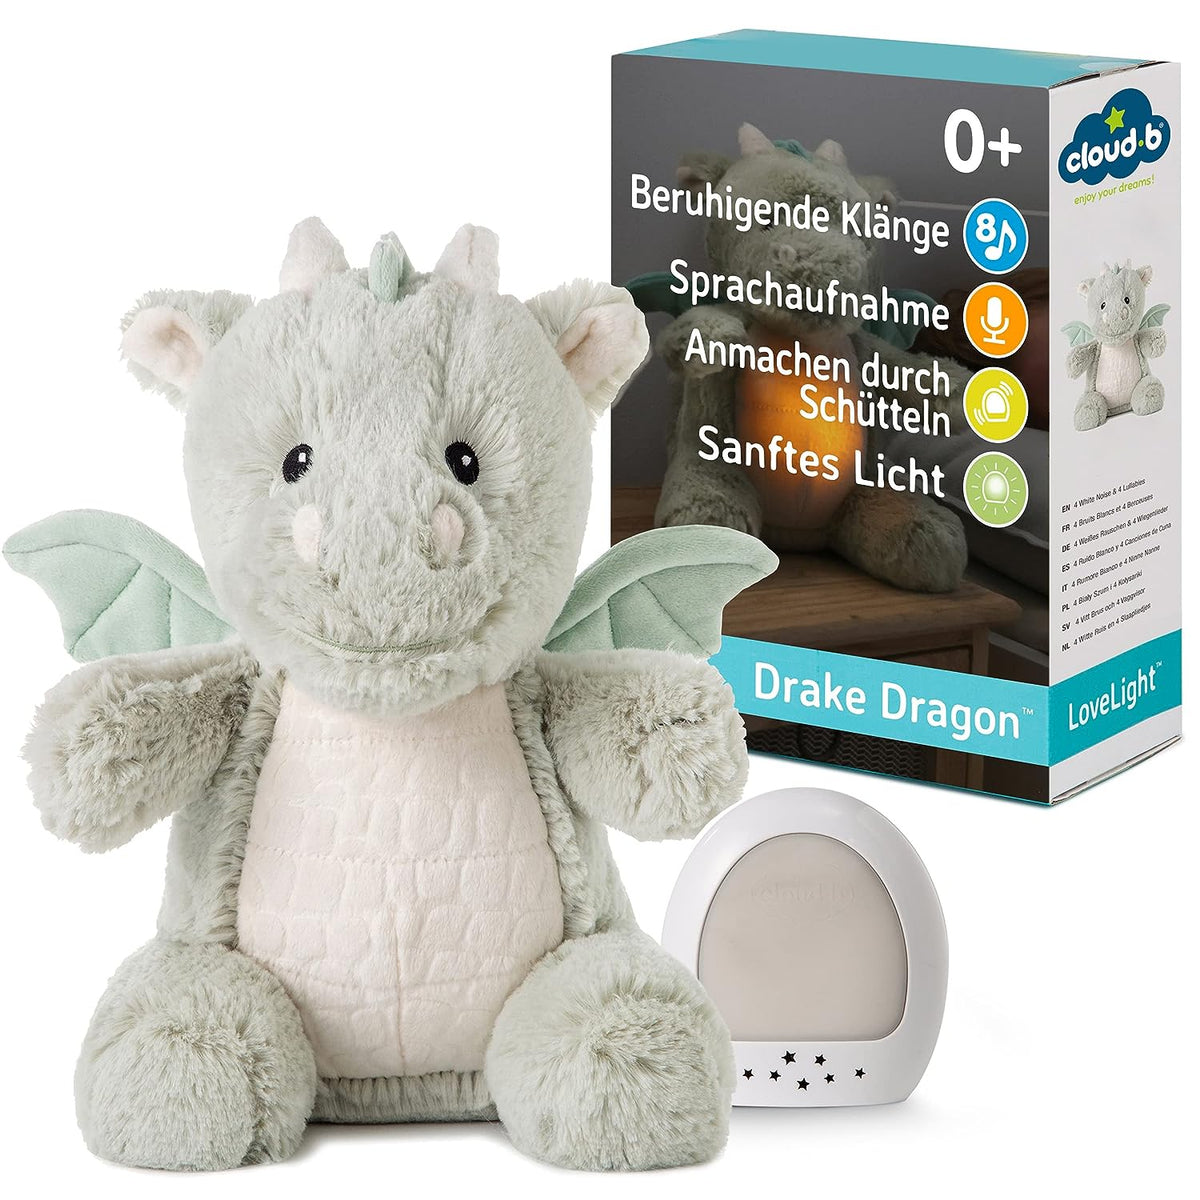 Extraordinary-cuddly-toys-berlindeluxe_dragon-packaging